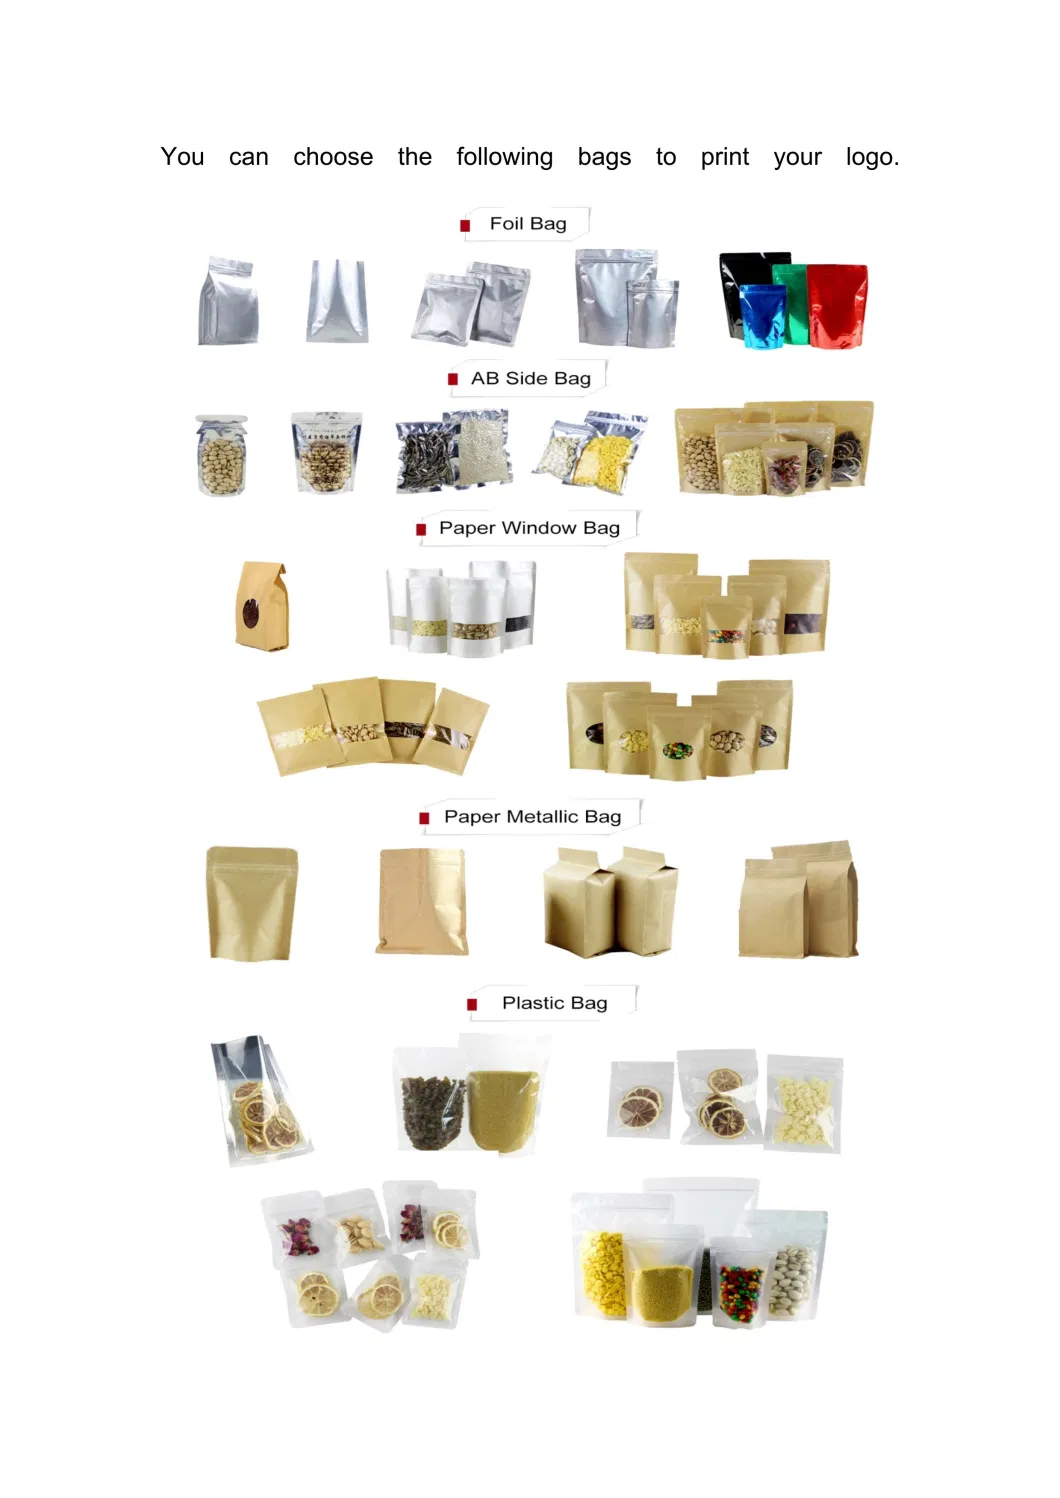 with Spout Degradable Refilled Reusable Organic Food Packaging Bags, Suction Mouthpiece Bag for Drinking Water and Pet Snacks.